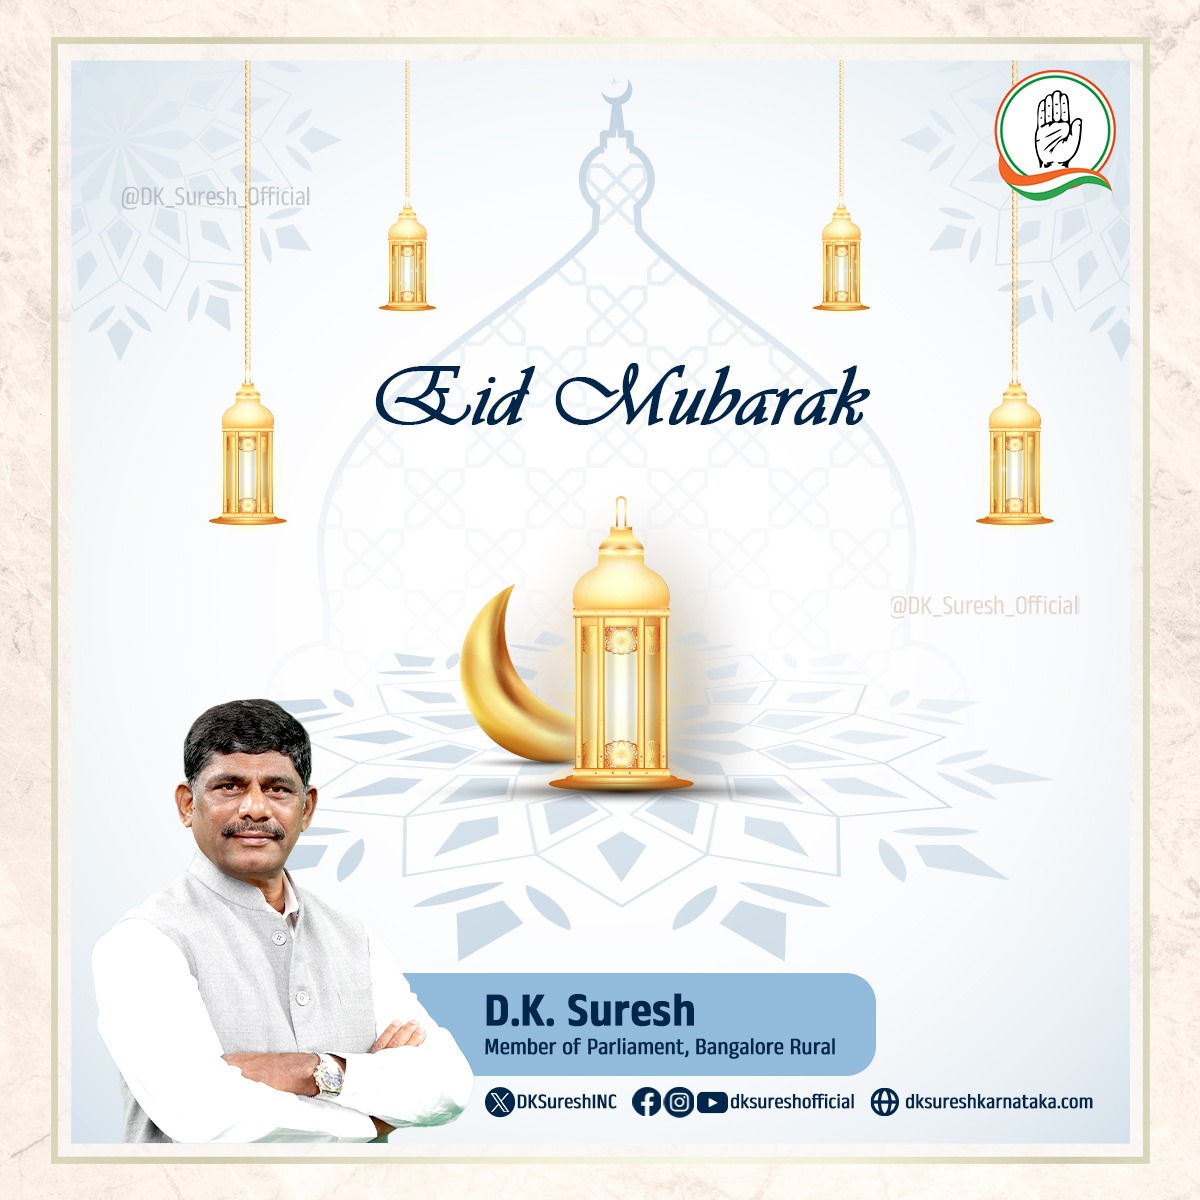 May this Eid bring more love, joy, blessings, and tranquility for all. #EidMubarak